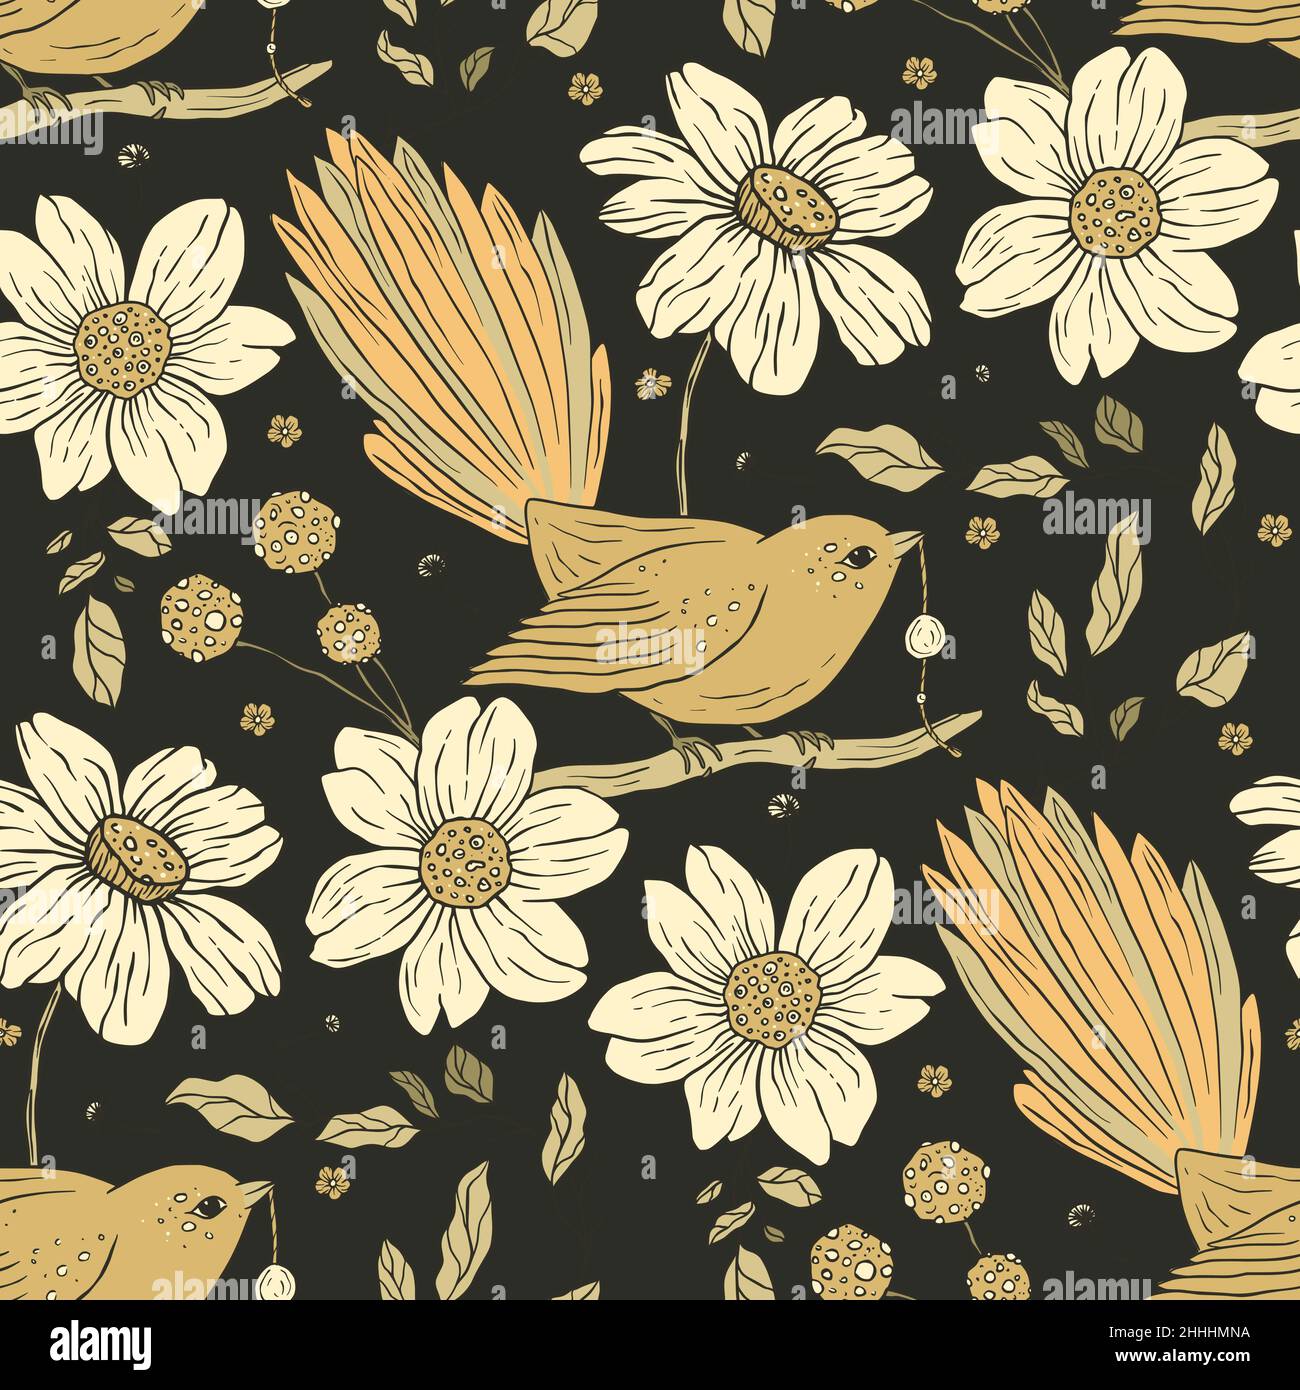 Vintage bird boho floral seamless pattern and daisy flower Stock Vector